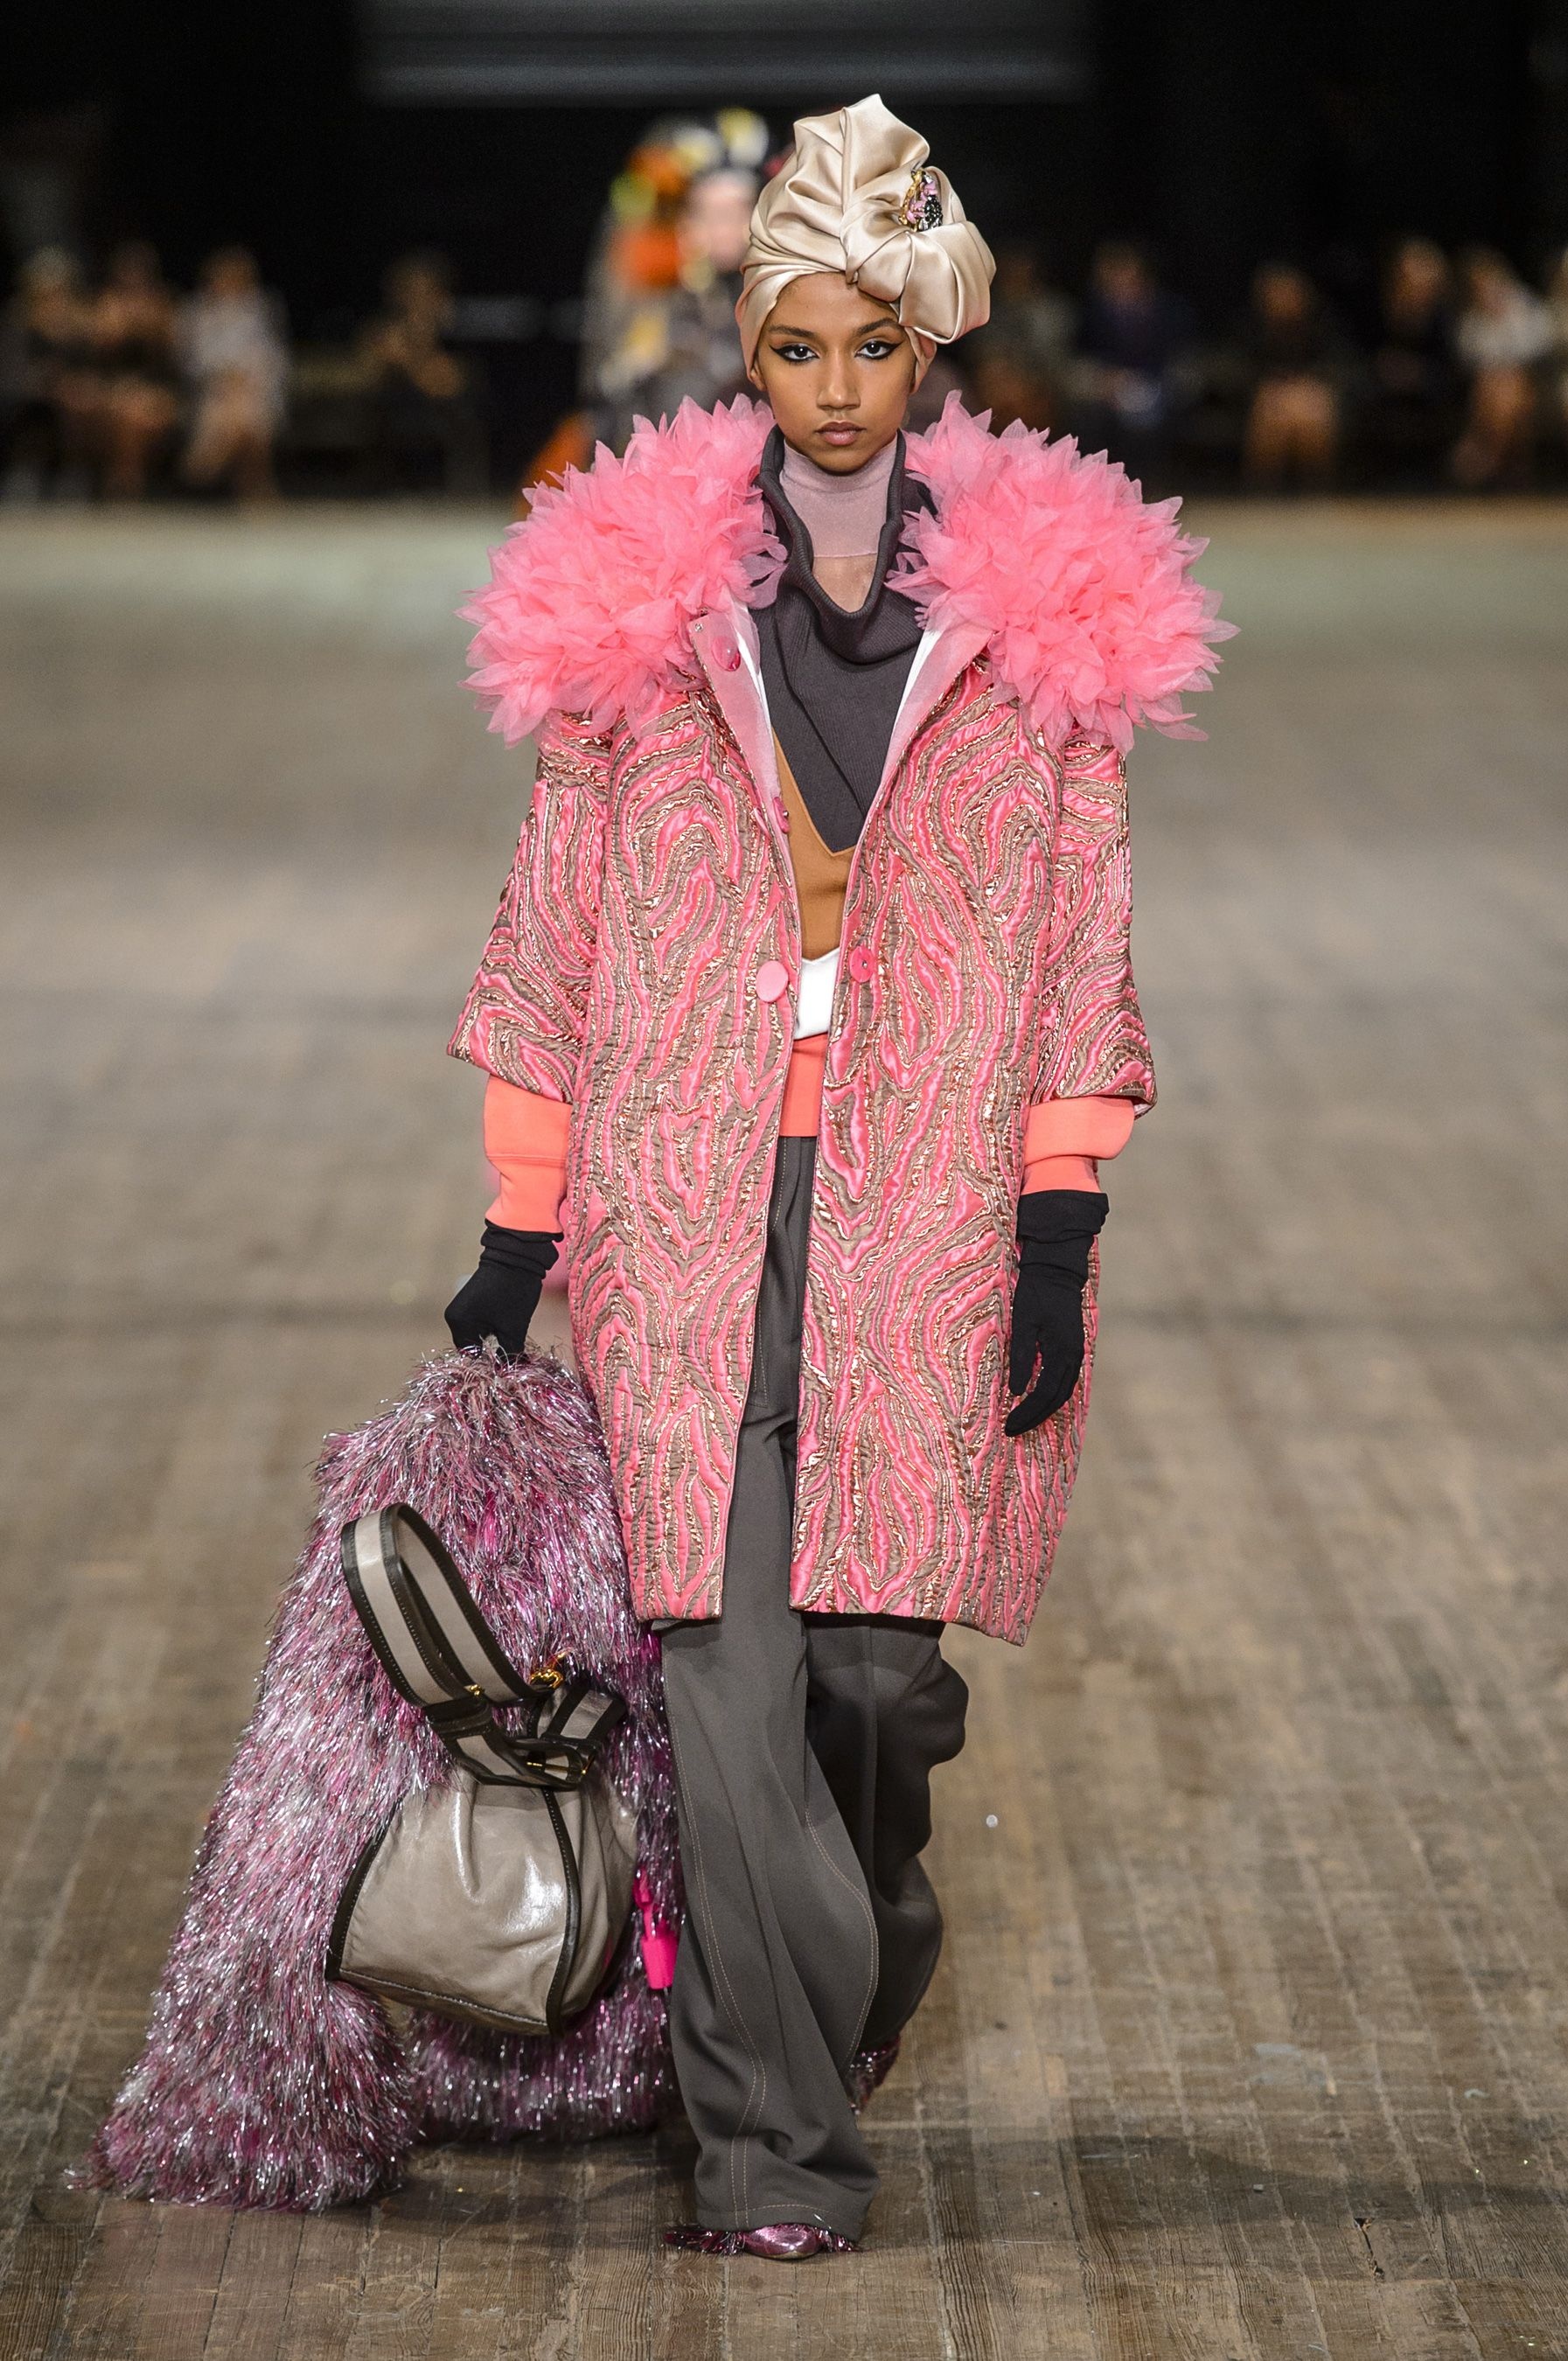 HD wallpaper, Marc Jacobs, Iphone Hd Marc Jacobs Wallpaper, Fashion Collection, Spring 2018, 1800X2700 Hd Phone, Ss18 Runway Show